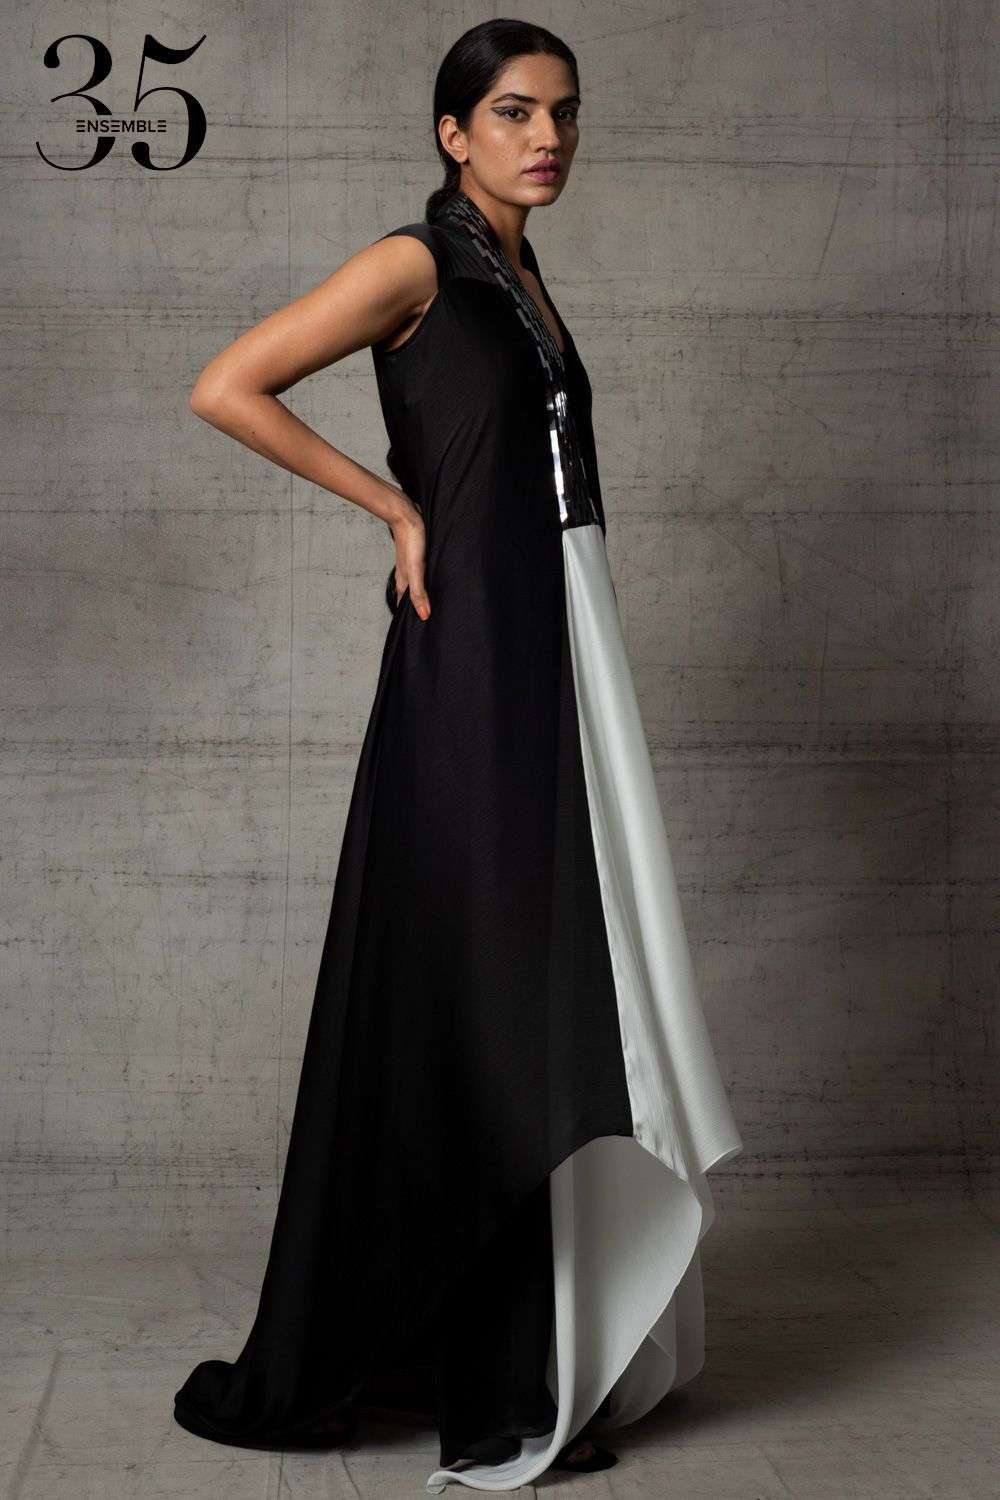 Black and White Formal Gown for a Bridesmaid